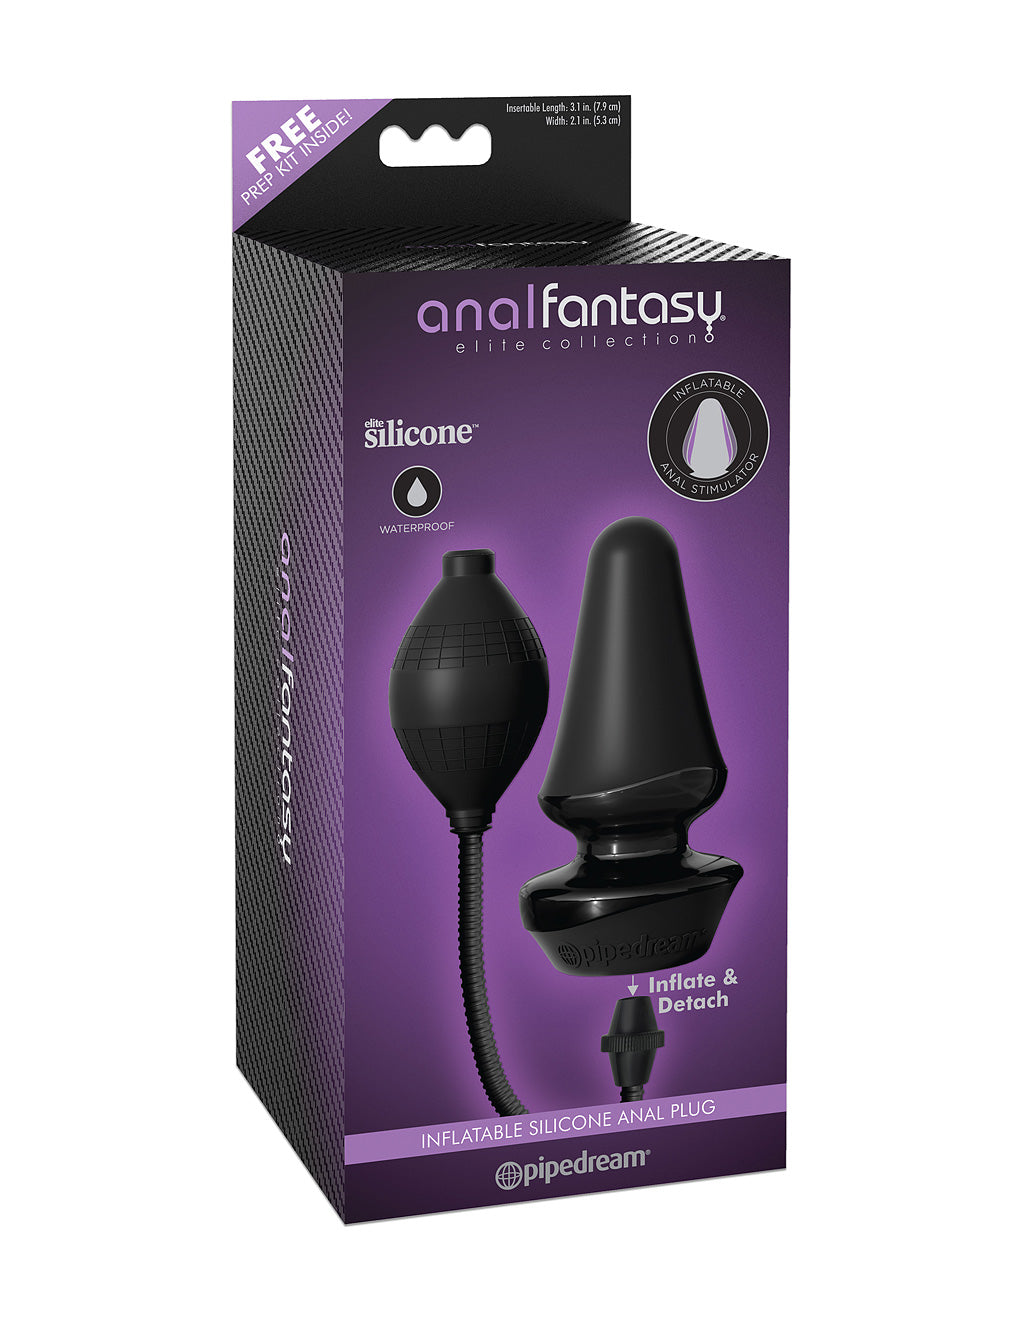 Anal Fantasy Elite Inflat Silic Plug By Pipedream Box Front